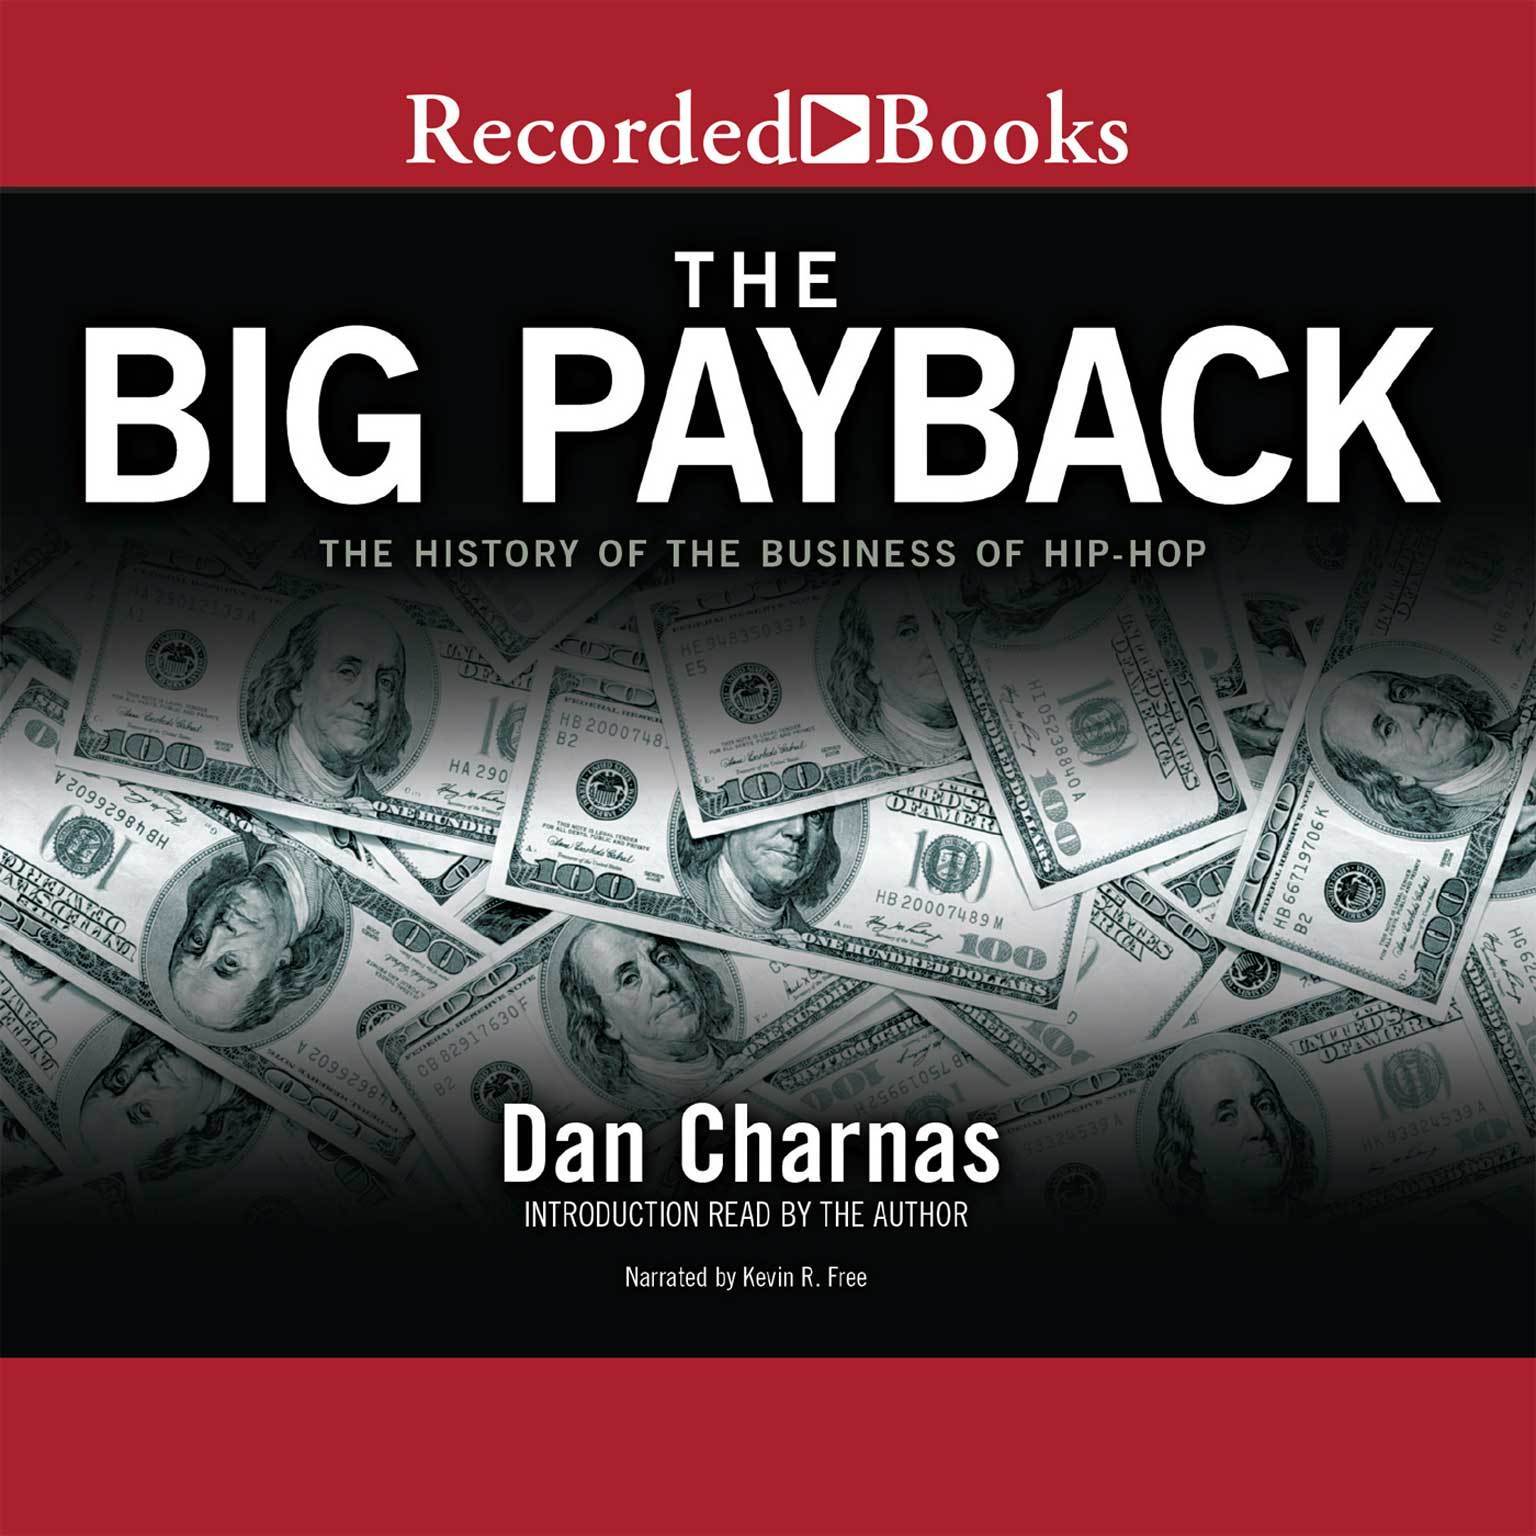 The Big Payback Audiobook Listen Instantly